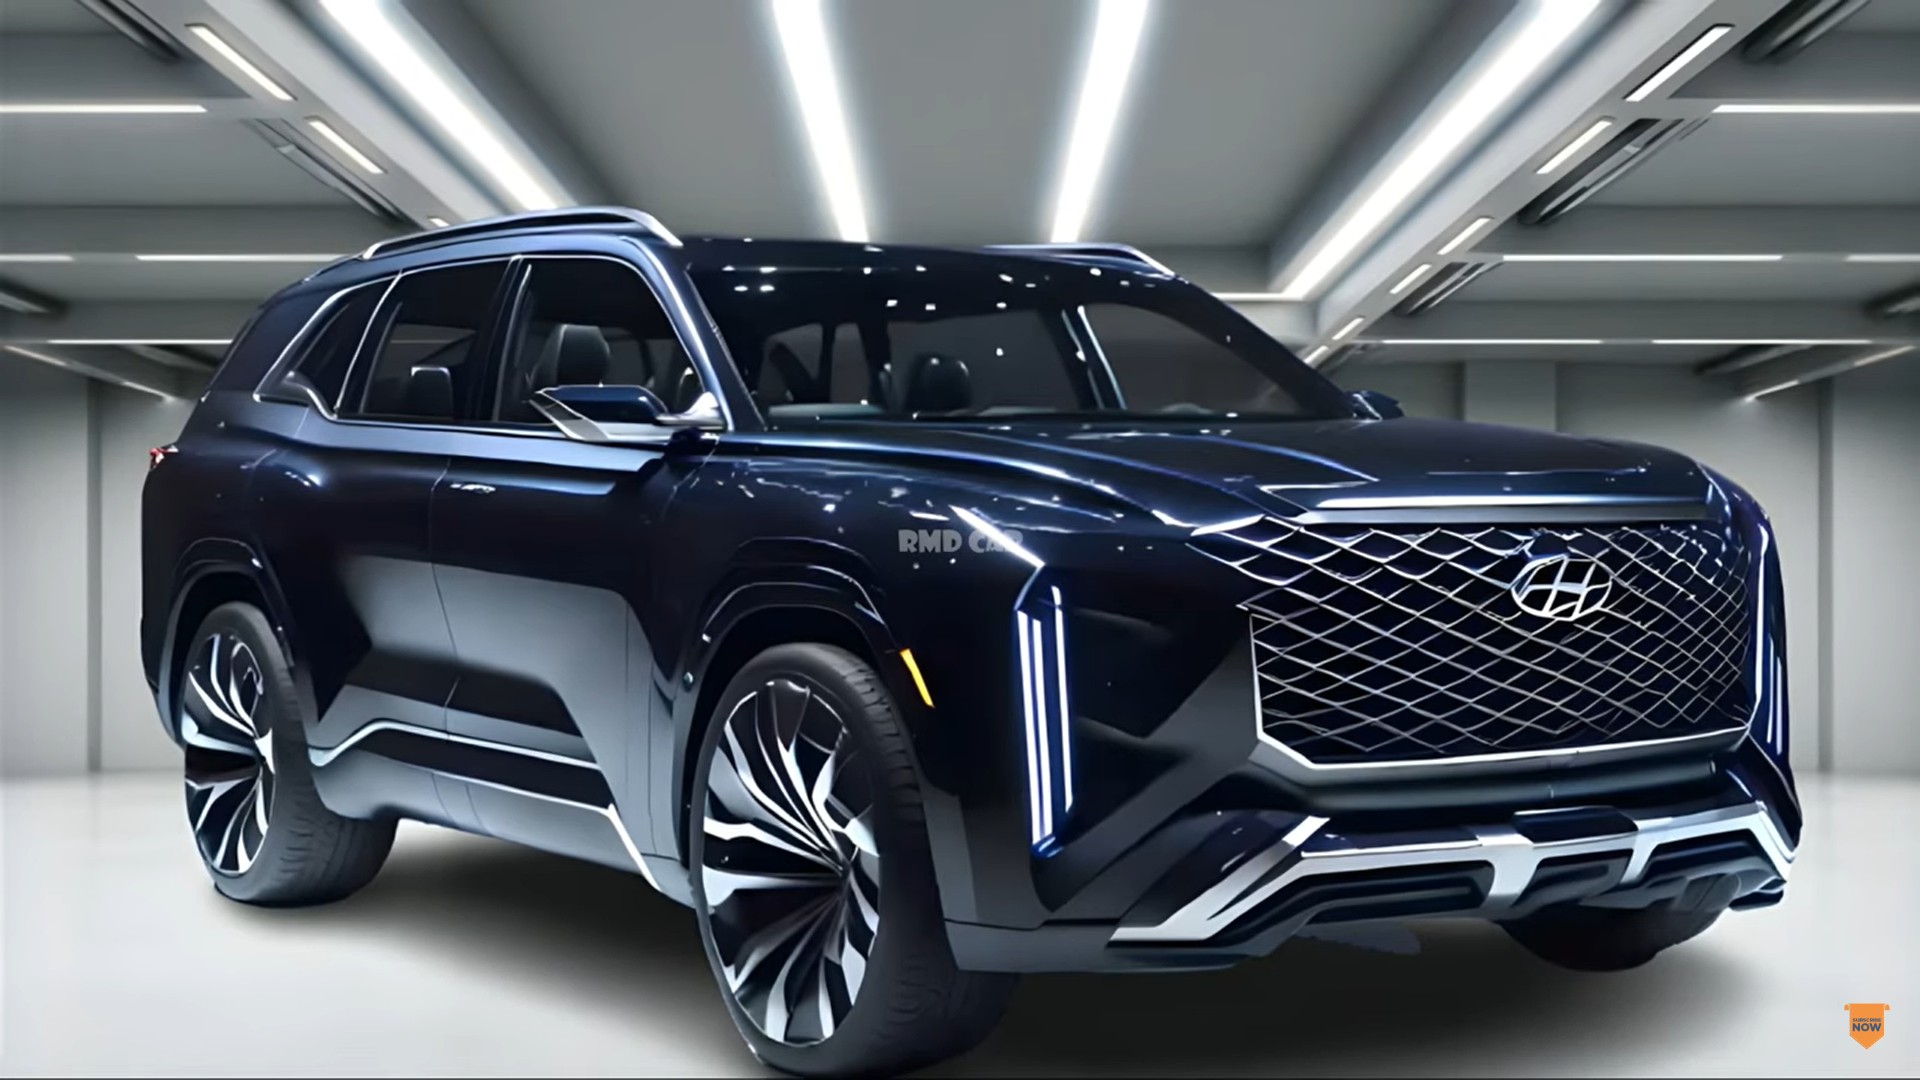 Big Hyundai Palisade Family SUV Gets Another Facelift, Albeit Only